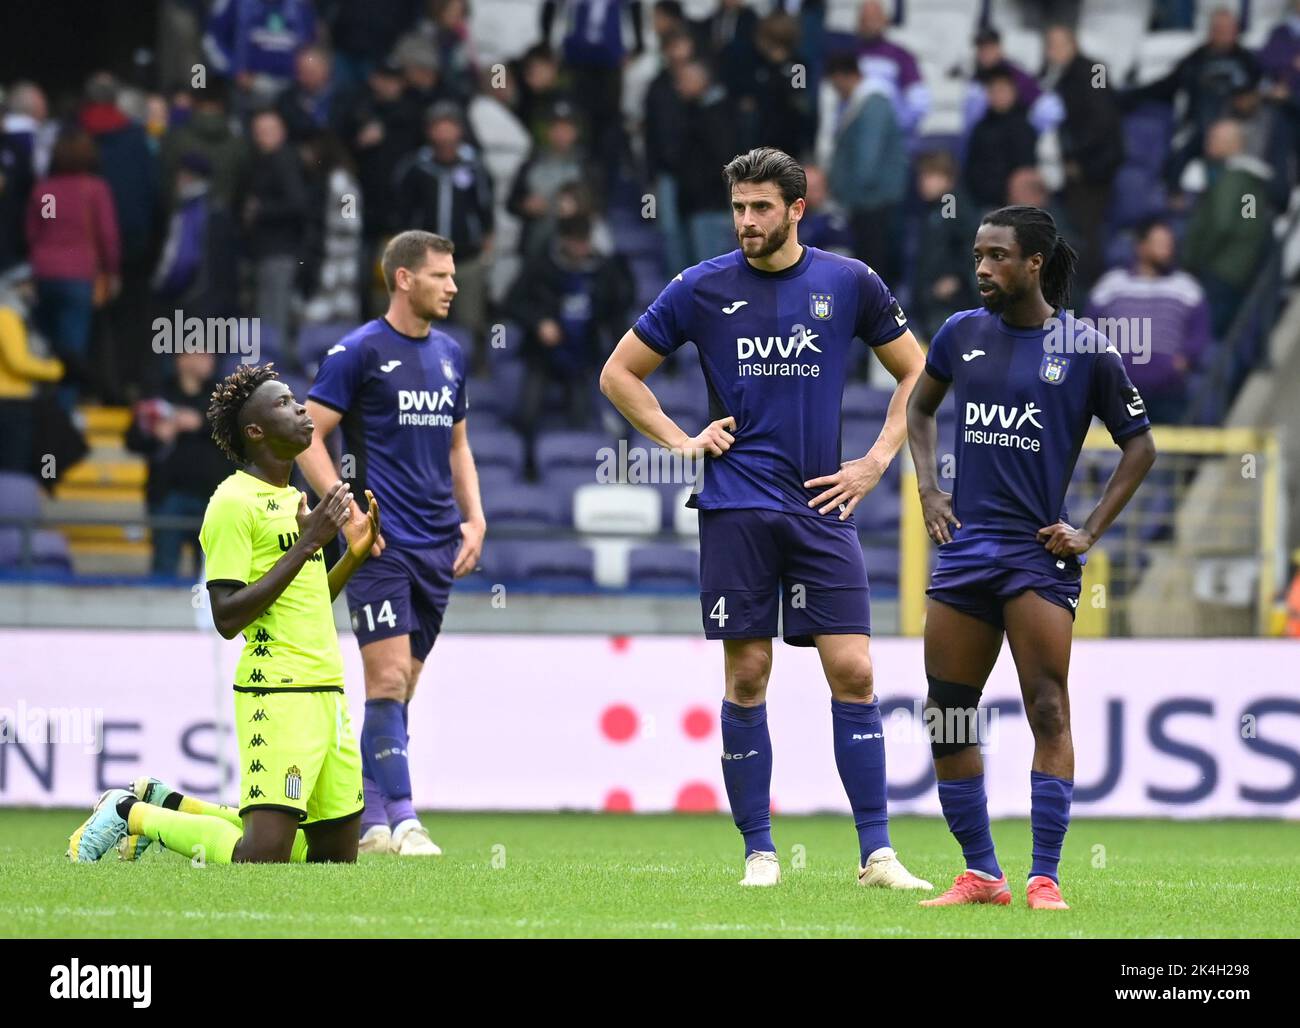 Anderlecht's players react during a soccer match between RSCA Anderlecht and Sporting Charleroi, Sunday 02 October 2022 in Anderlecht, on day 10 of the 2022-2023 'Jupiler Pro League' first division of the Belgian championship. BELGA PHOTO JOHN THYS Stock Photo